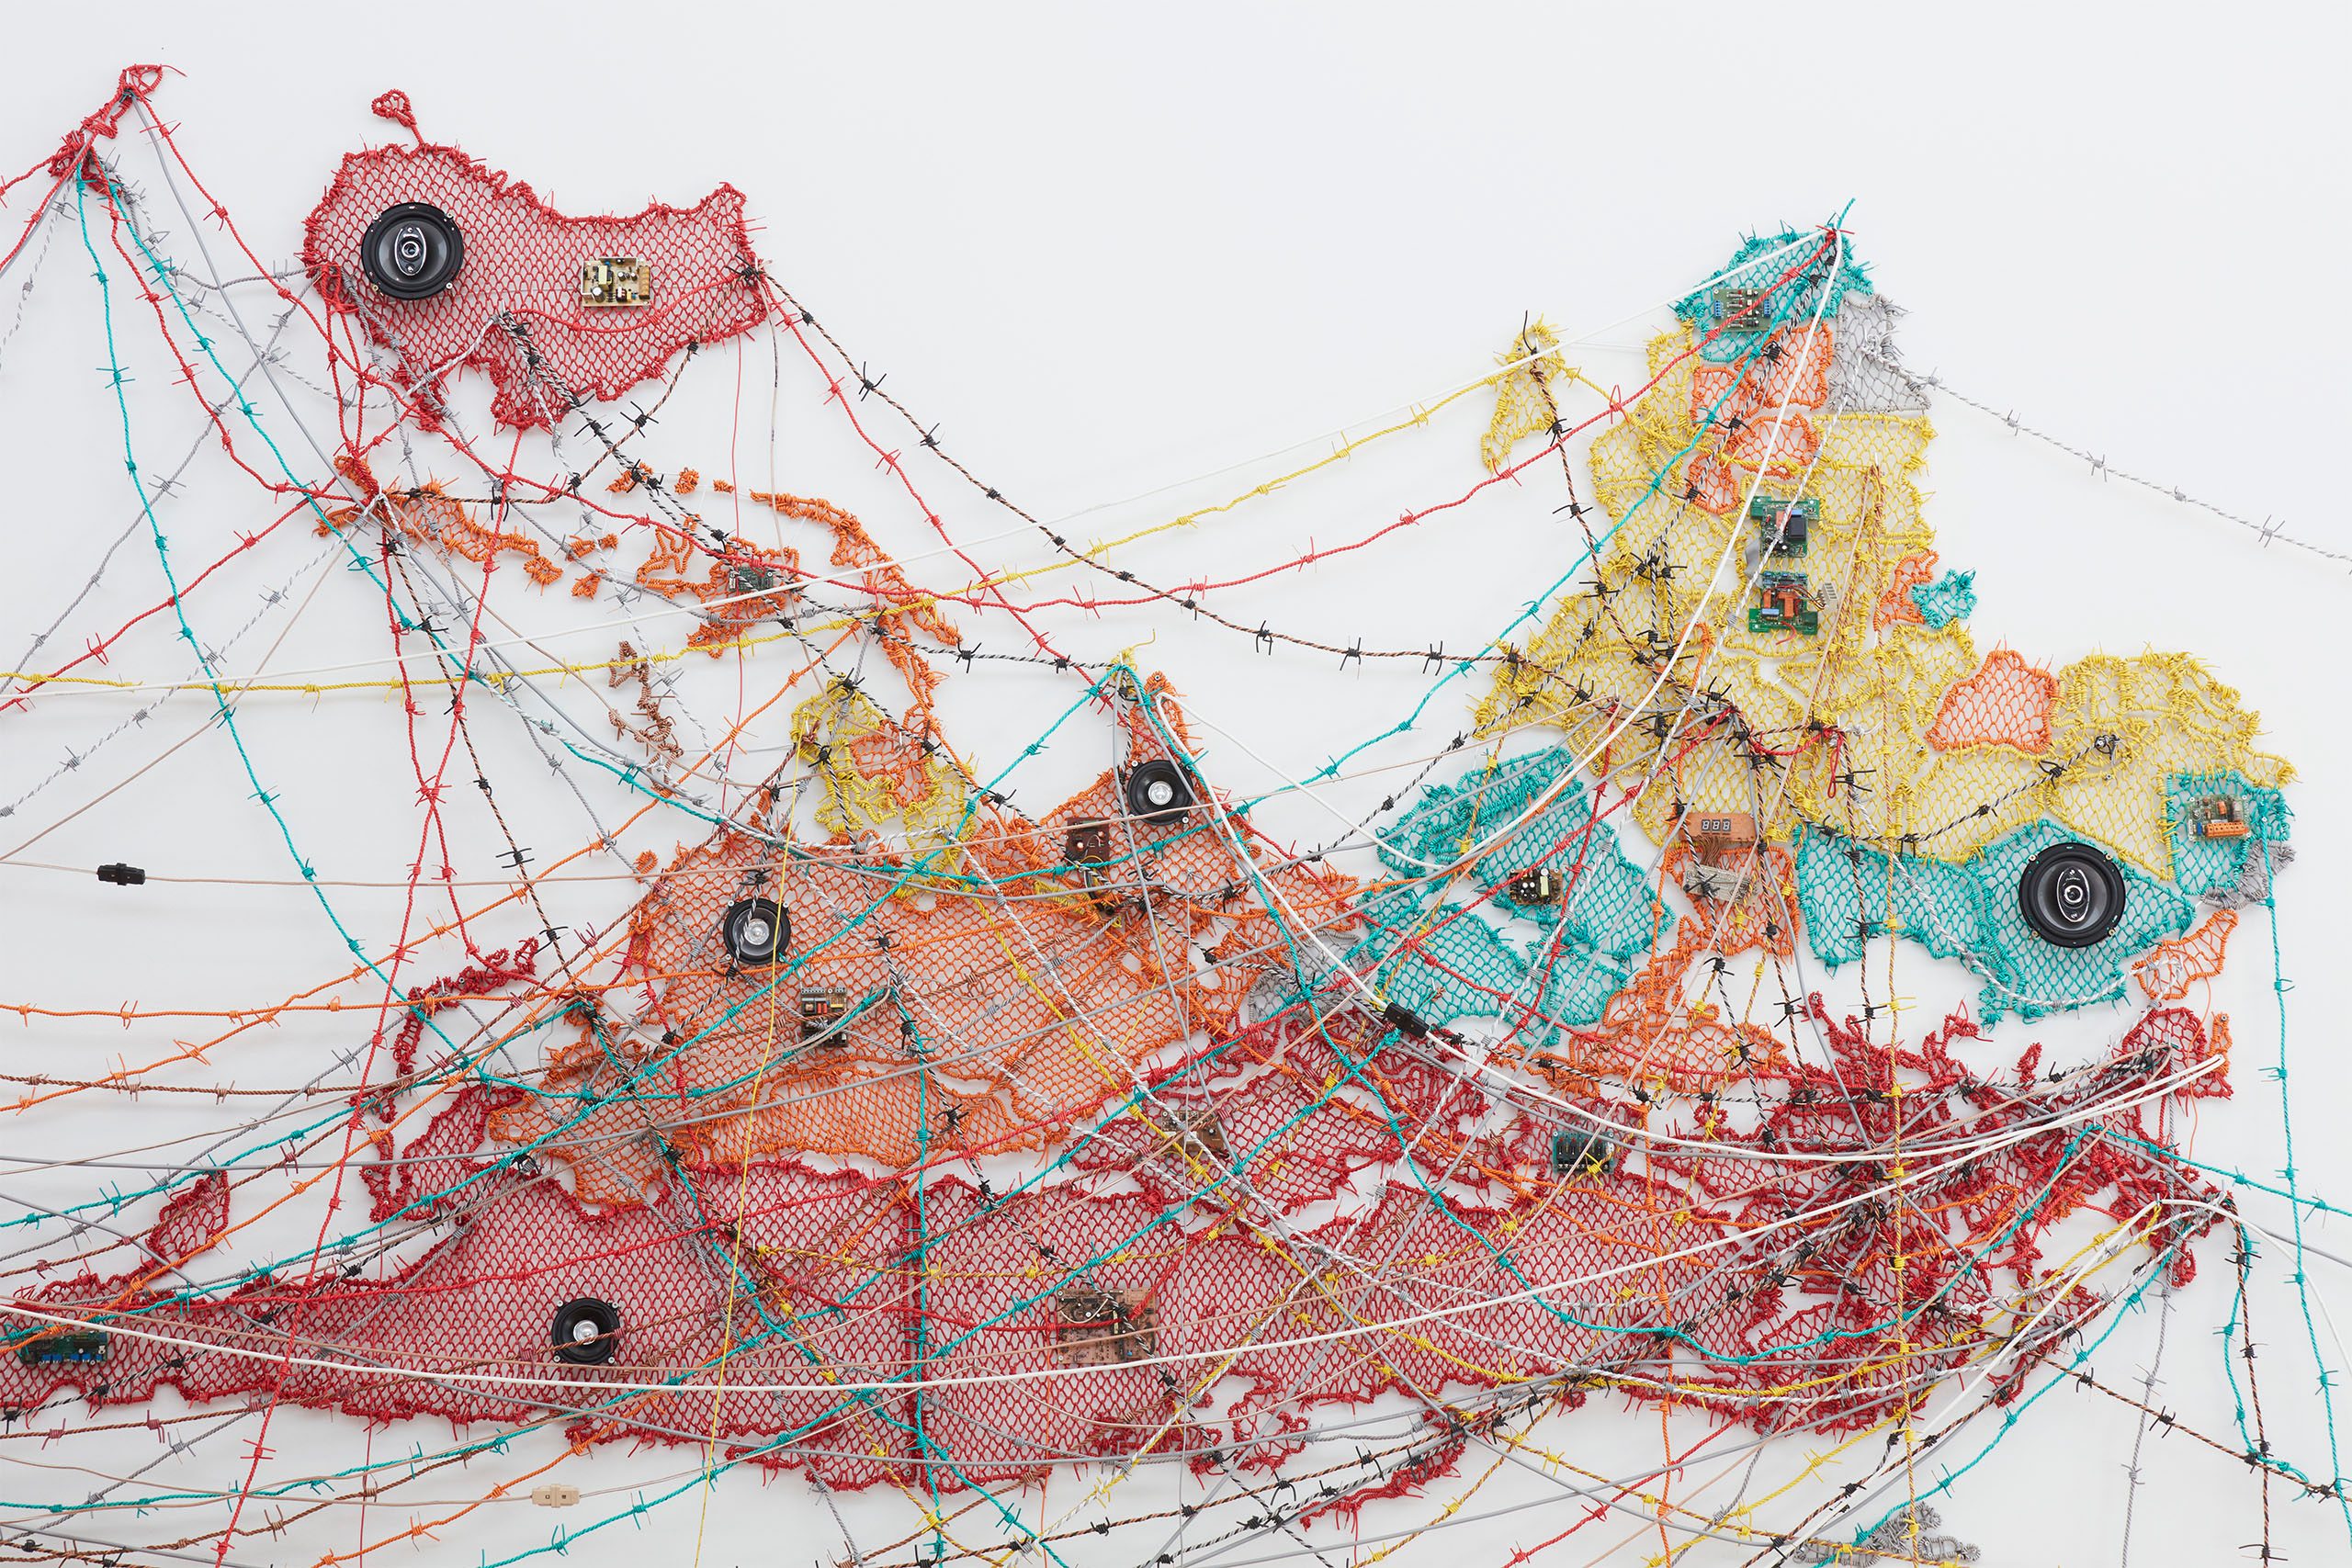 An abstract mixed-media artwork featuring an intricate web-like structure made of mesh, wires, and electronic components in vibrant shades of red, yellow, and turquoise. The piece incorporates various textures and materials, creating a complex and dynamic visual composition.